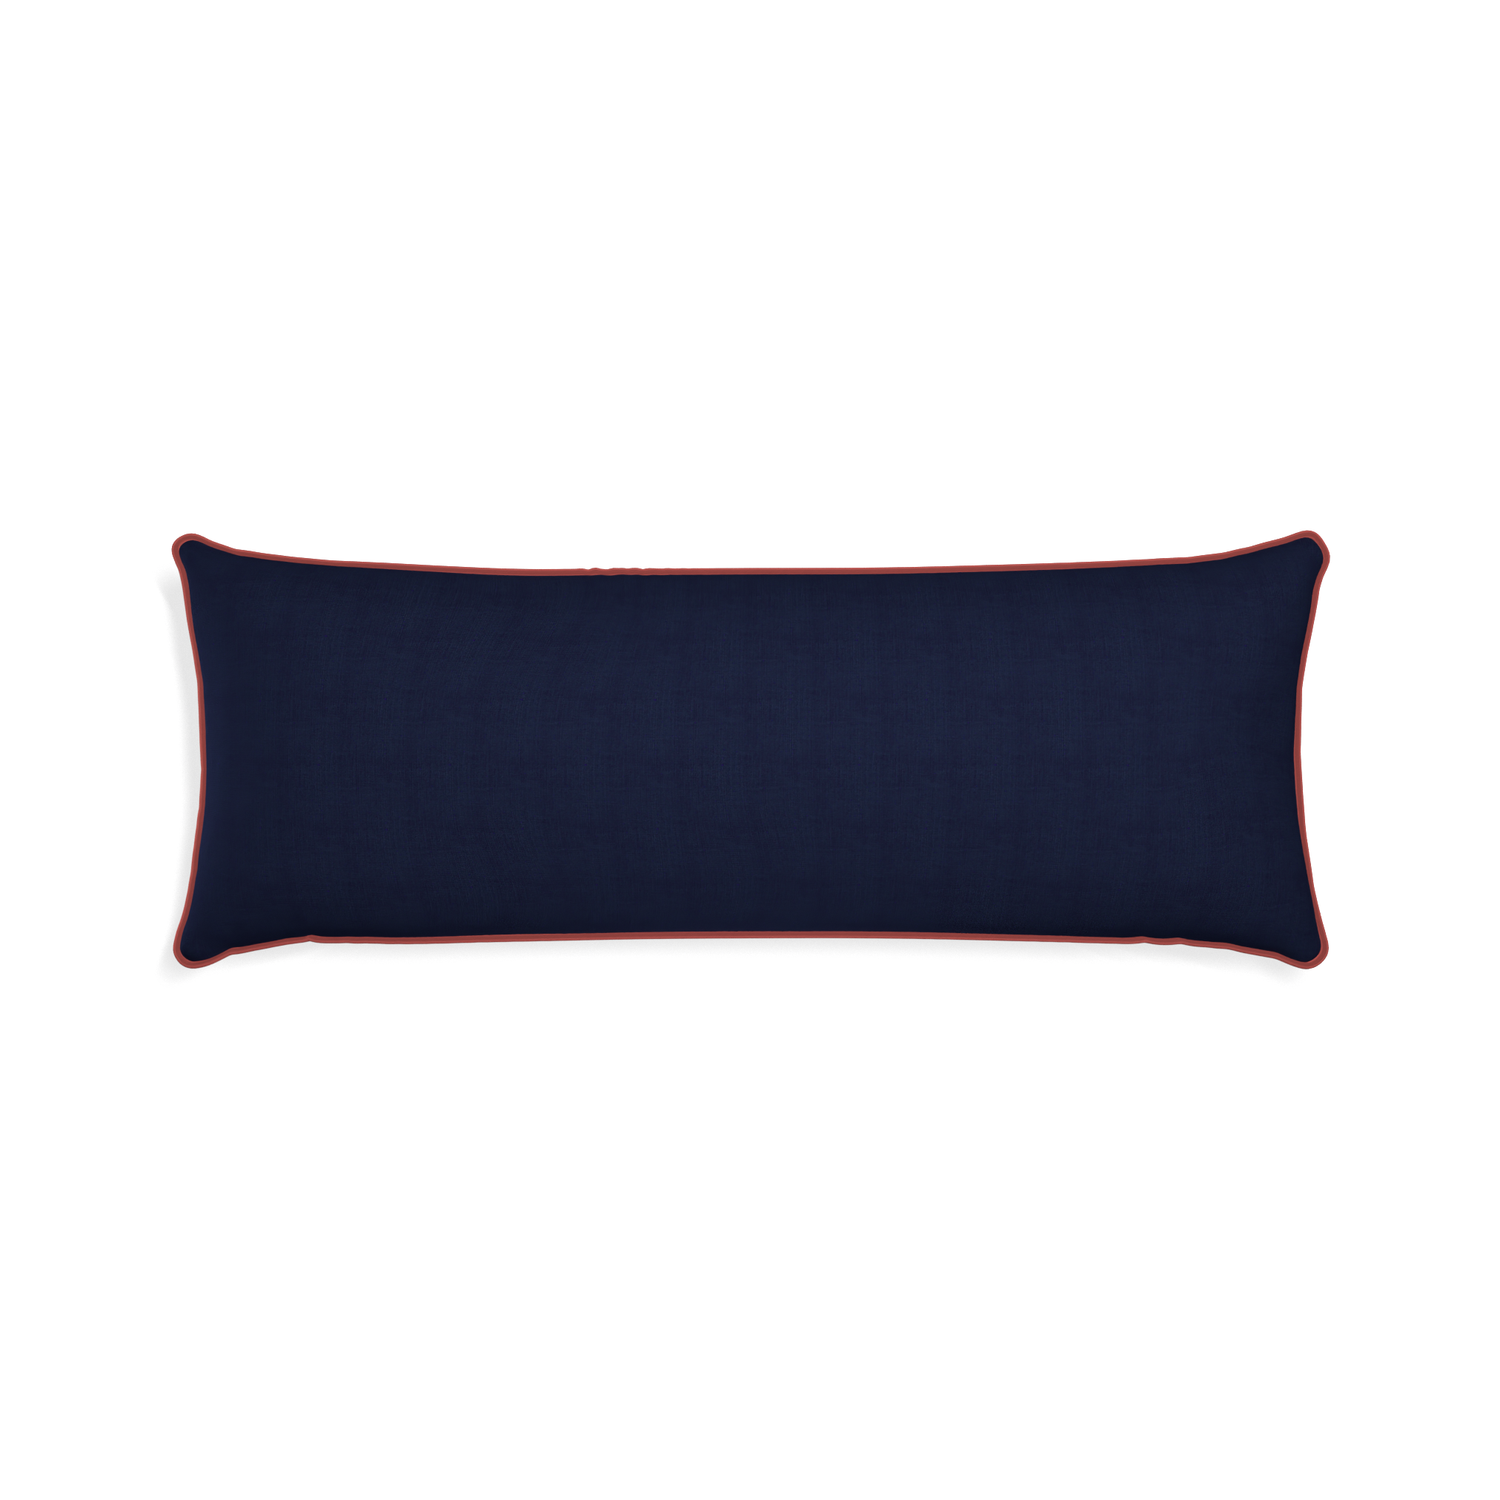 Xl-lumbar midnight custom pillow with c piping on white background